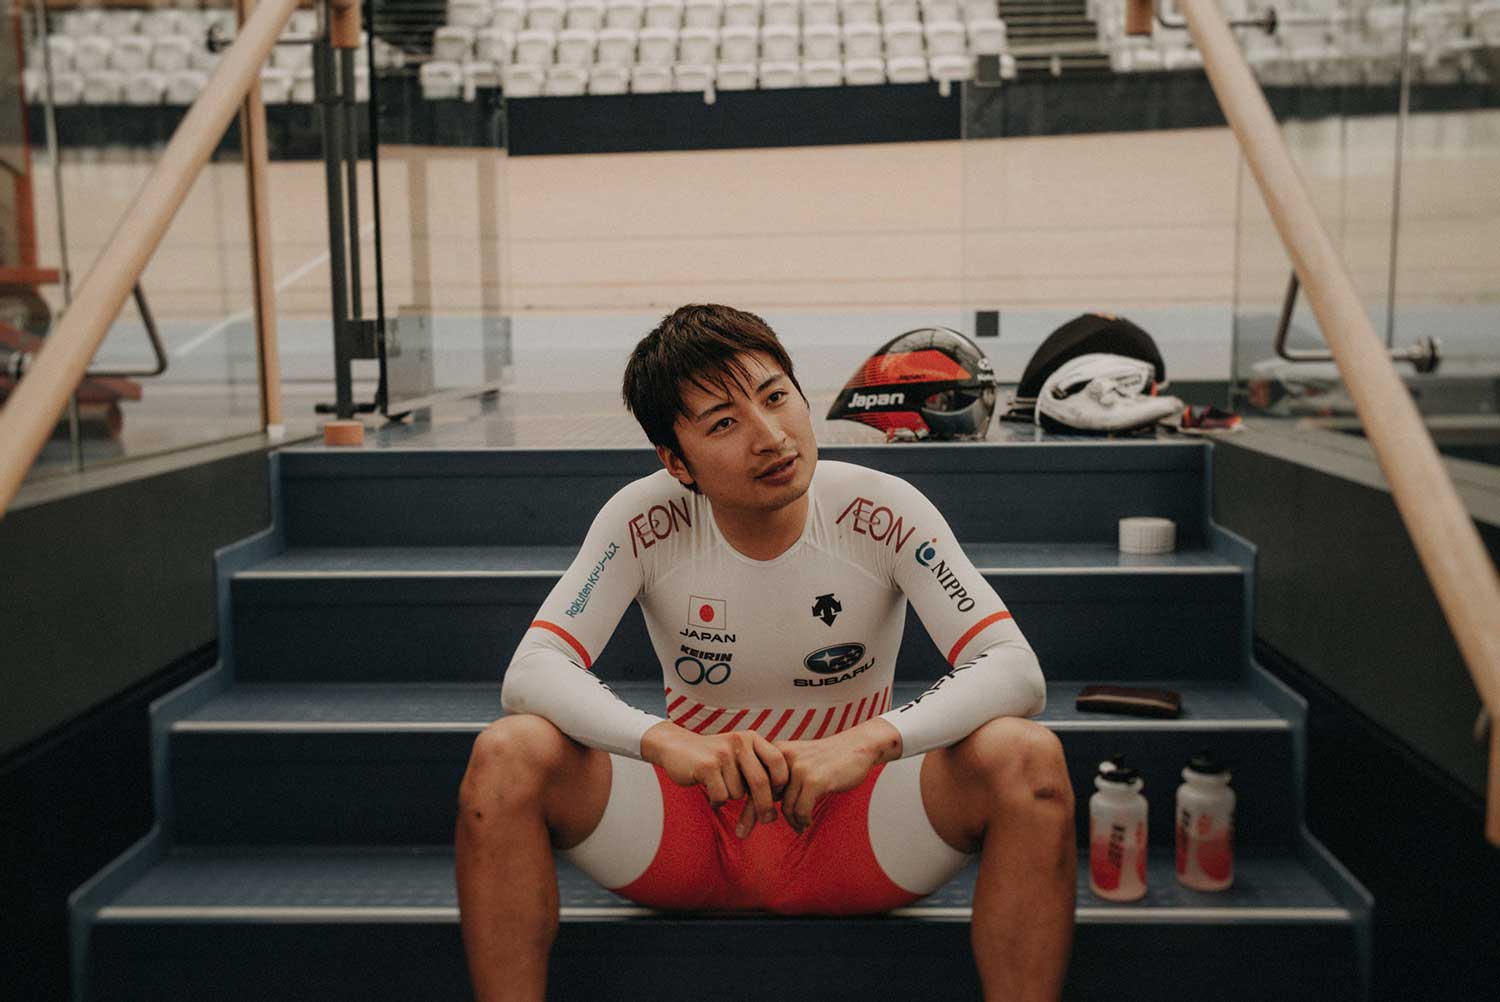 Japanese cyclist sits down after training in velodrome to discuss performance